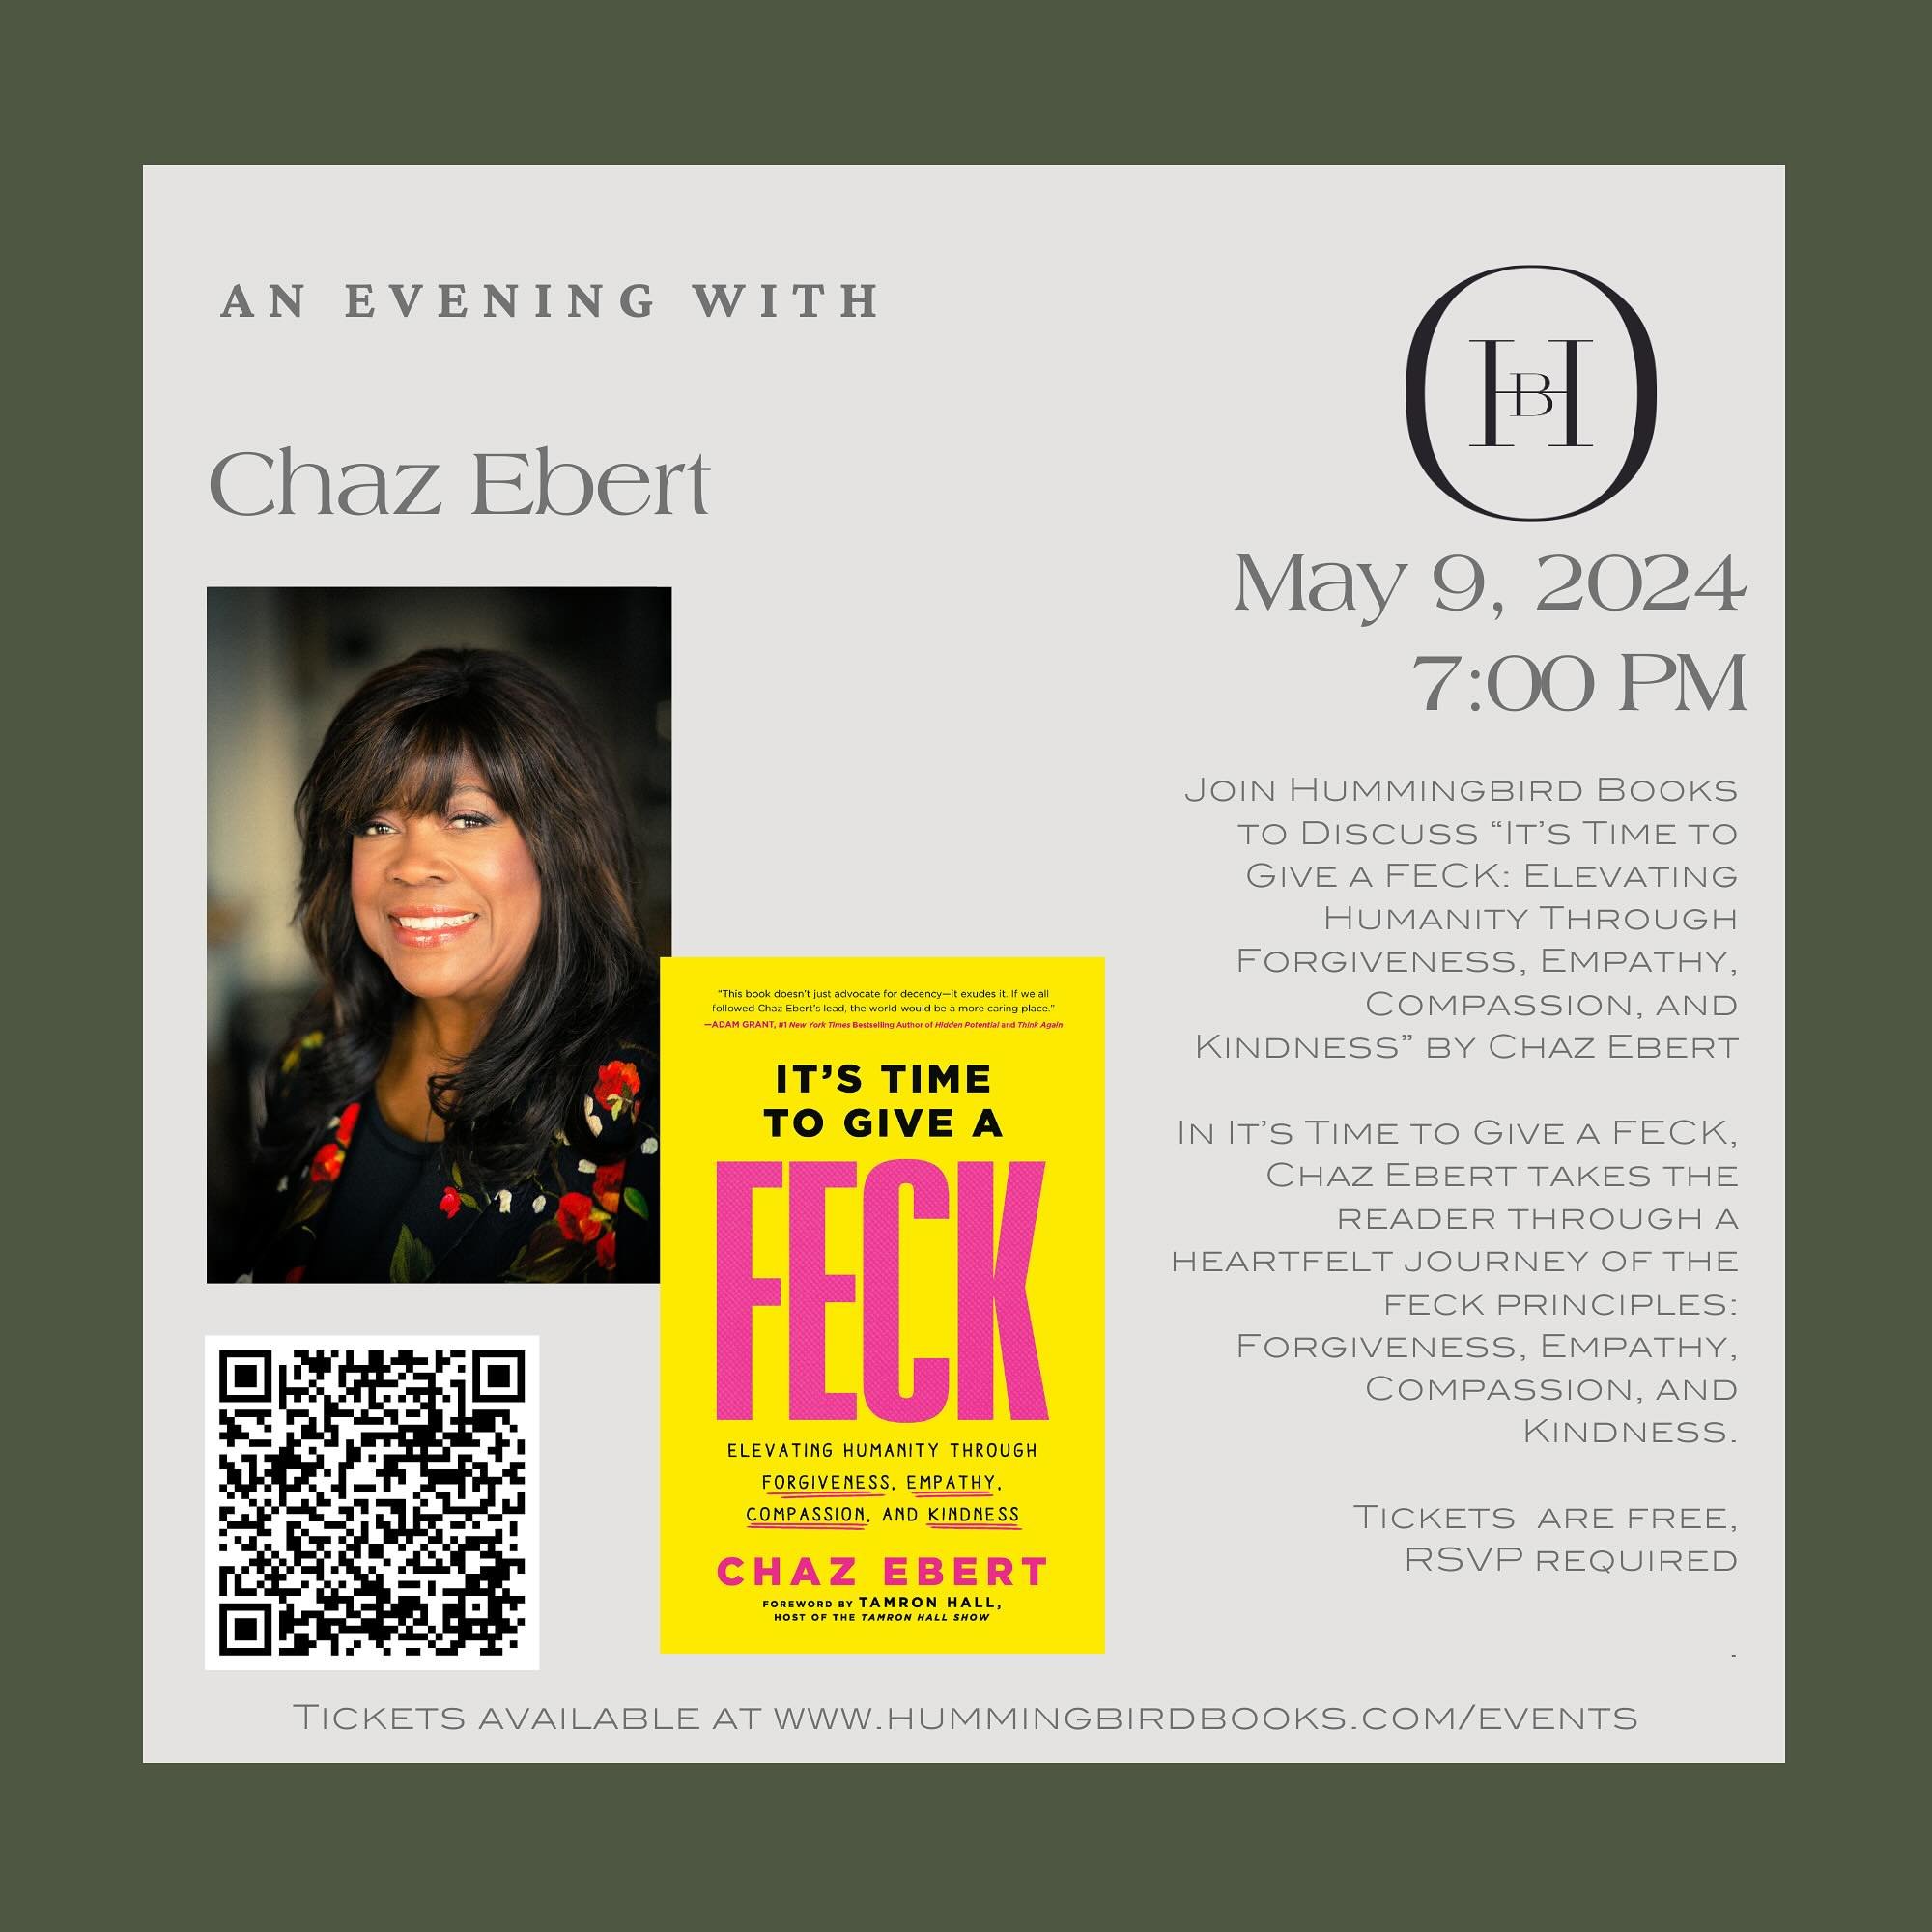 Forgiveness, Empathy, Compassion Kindness - It&rsquo;s time to give a FECK with @chazebert. Join us on May 9 to discuss her new release. Tickets available through the QR code on this post or by visiting our events page on our website. 

#indiebooksto